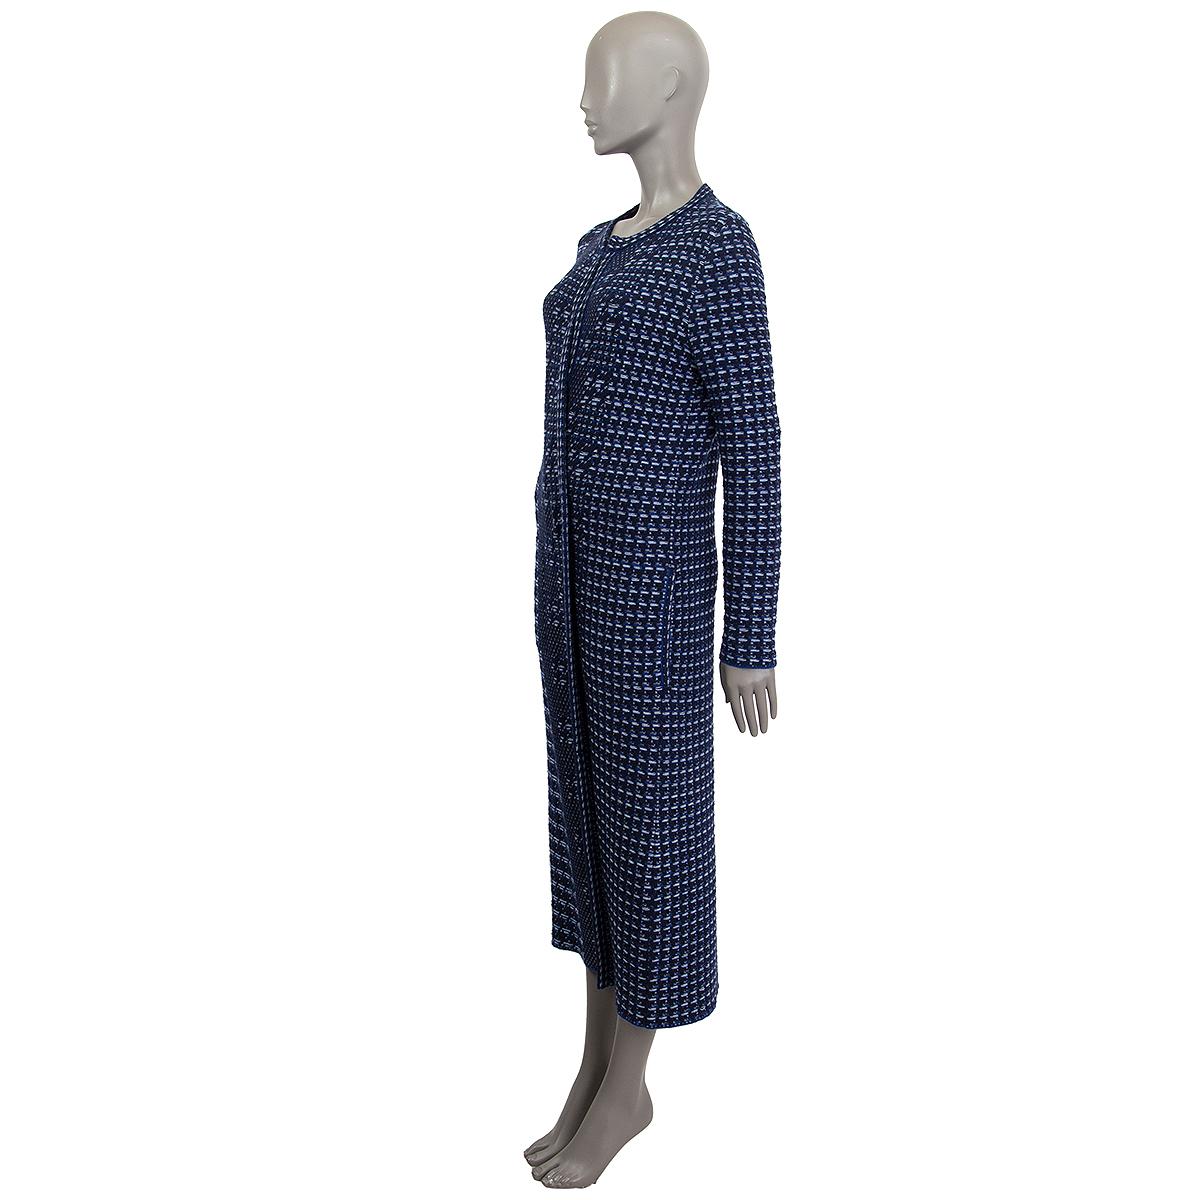 100% authentic Oscar de la Renta open knit coat in blue, navy blue and sky blue wool (100%) with pockets. Closes on the front with concealed hooks. Unlined. Has been worn and is in excellent condition. 

Measurements
Tag Size	S
Size	S
Shoulder